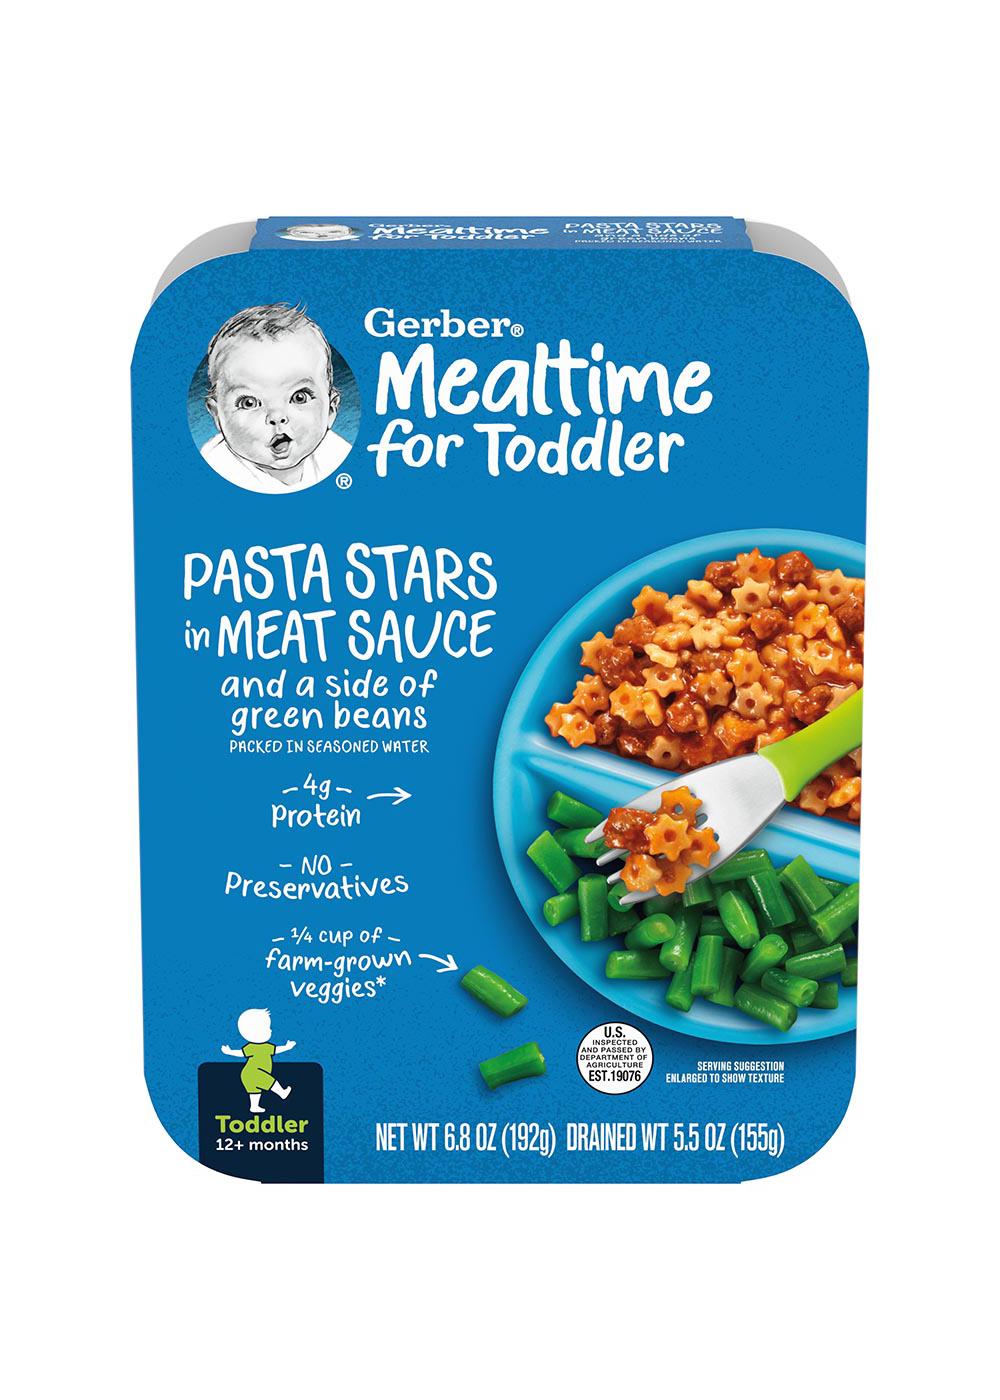 Gerber Mealtime for Toddler - Pasta Stars in Meat Sauce and a side of Green Beans; image 1 of 8